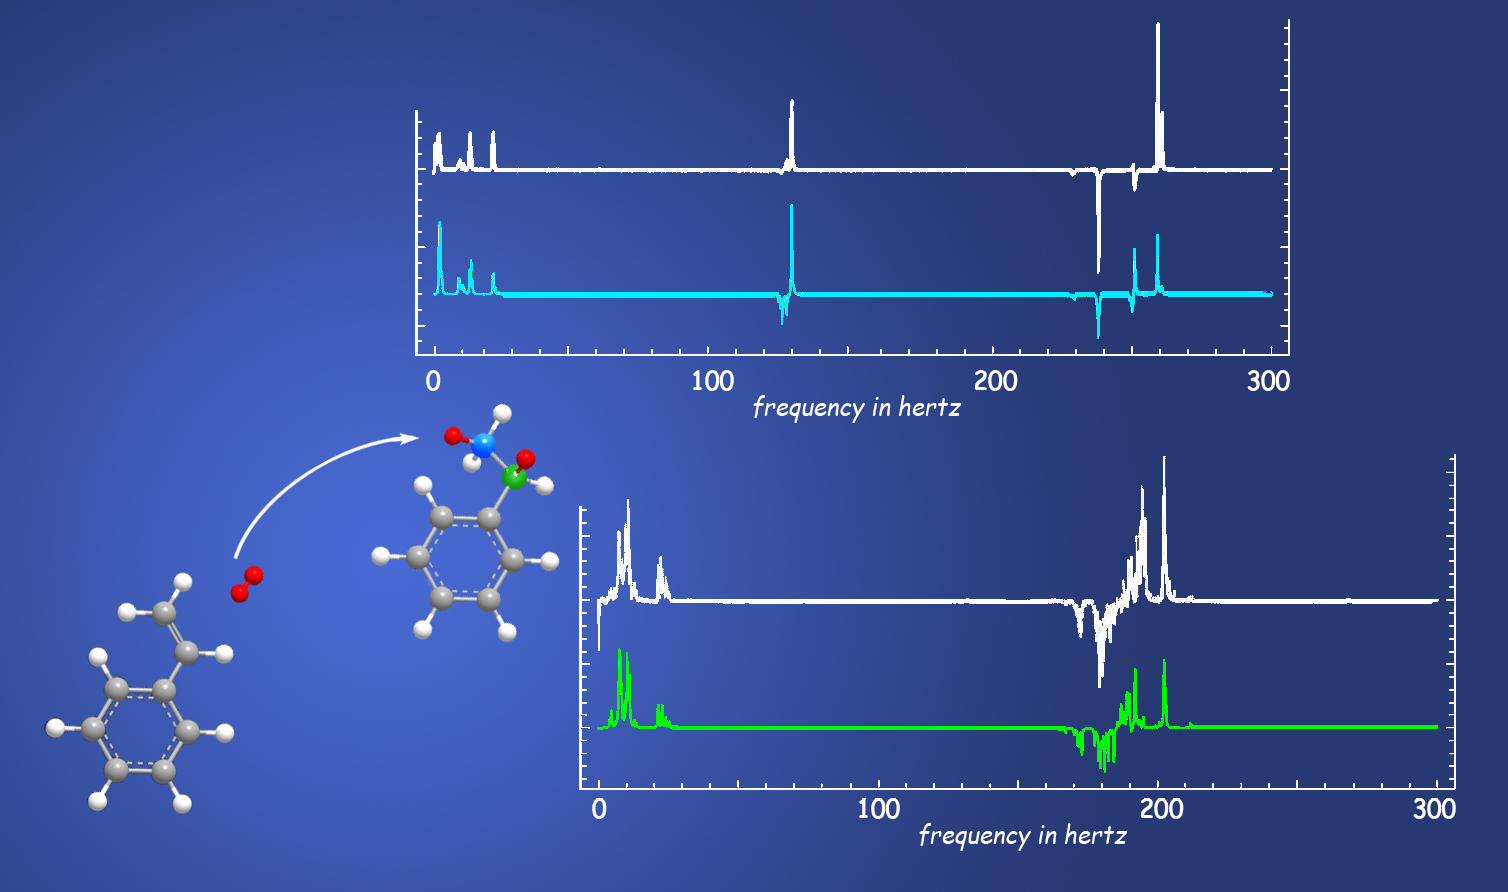 A molecule of parahydrogen hydrogenates a styrene molecule to form ethylbenzene. J-coupling reveals the position and orientation of the hydrogen atoms and the carbon-13 atoms to which they bond. The upper panel shows a simulated spectrum, in blue, of coupling between a hydrogen and a carbon in the methyl position. The actual experimental data are in white. The lower panel shows simulation of coupling in the methylene position, in green, with actual data in white. Simulation and experiment are in close agreement, indicating the promise of the zero-field technique for chemical fingerprinting. 